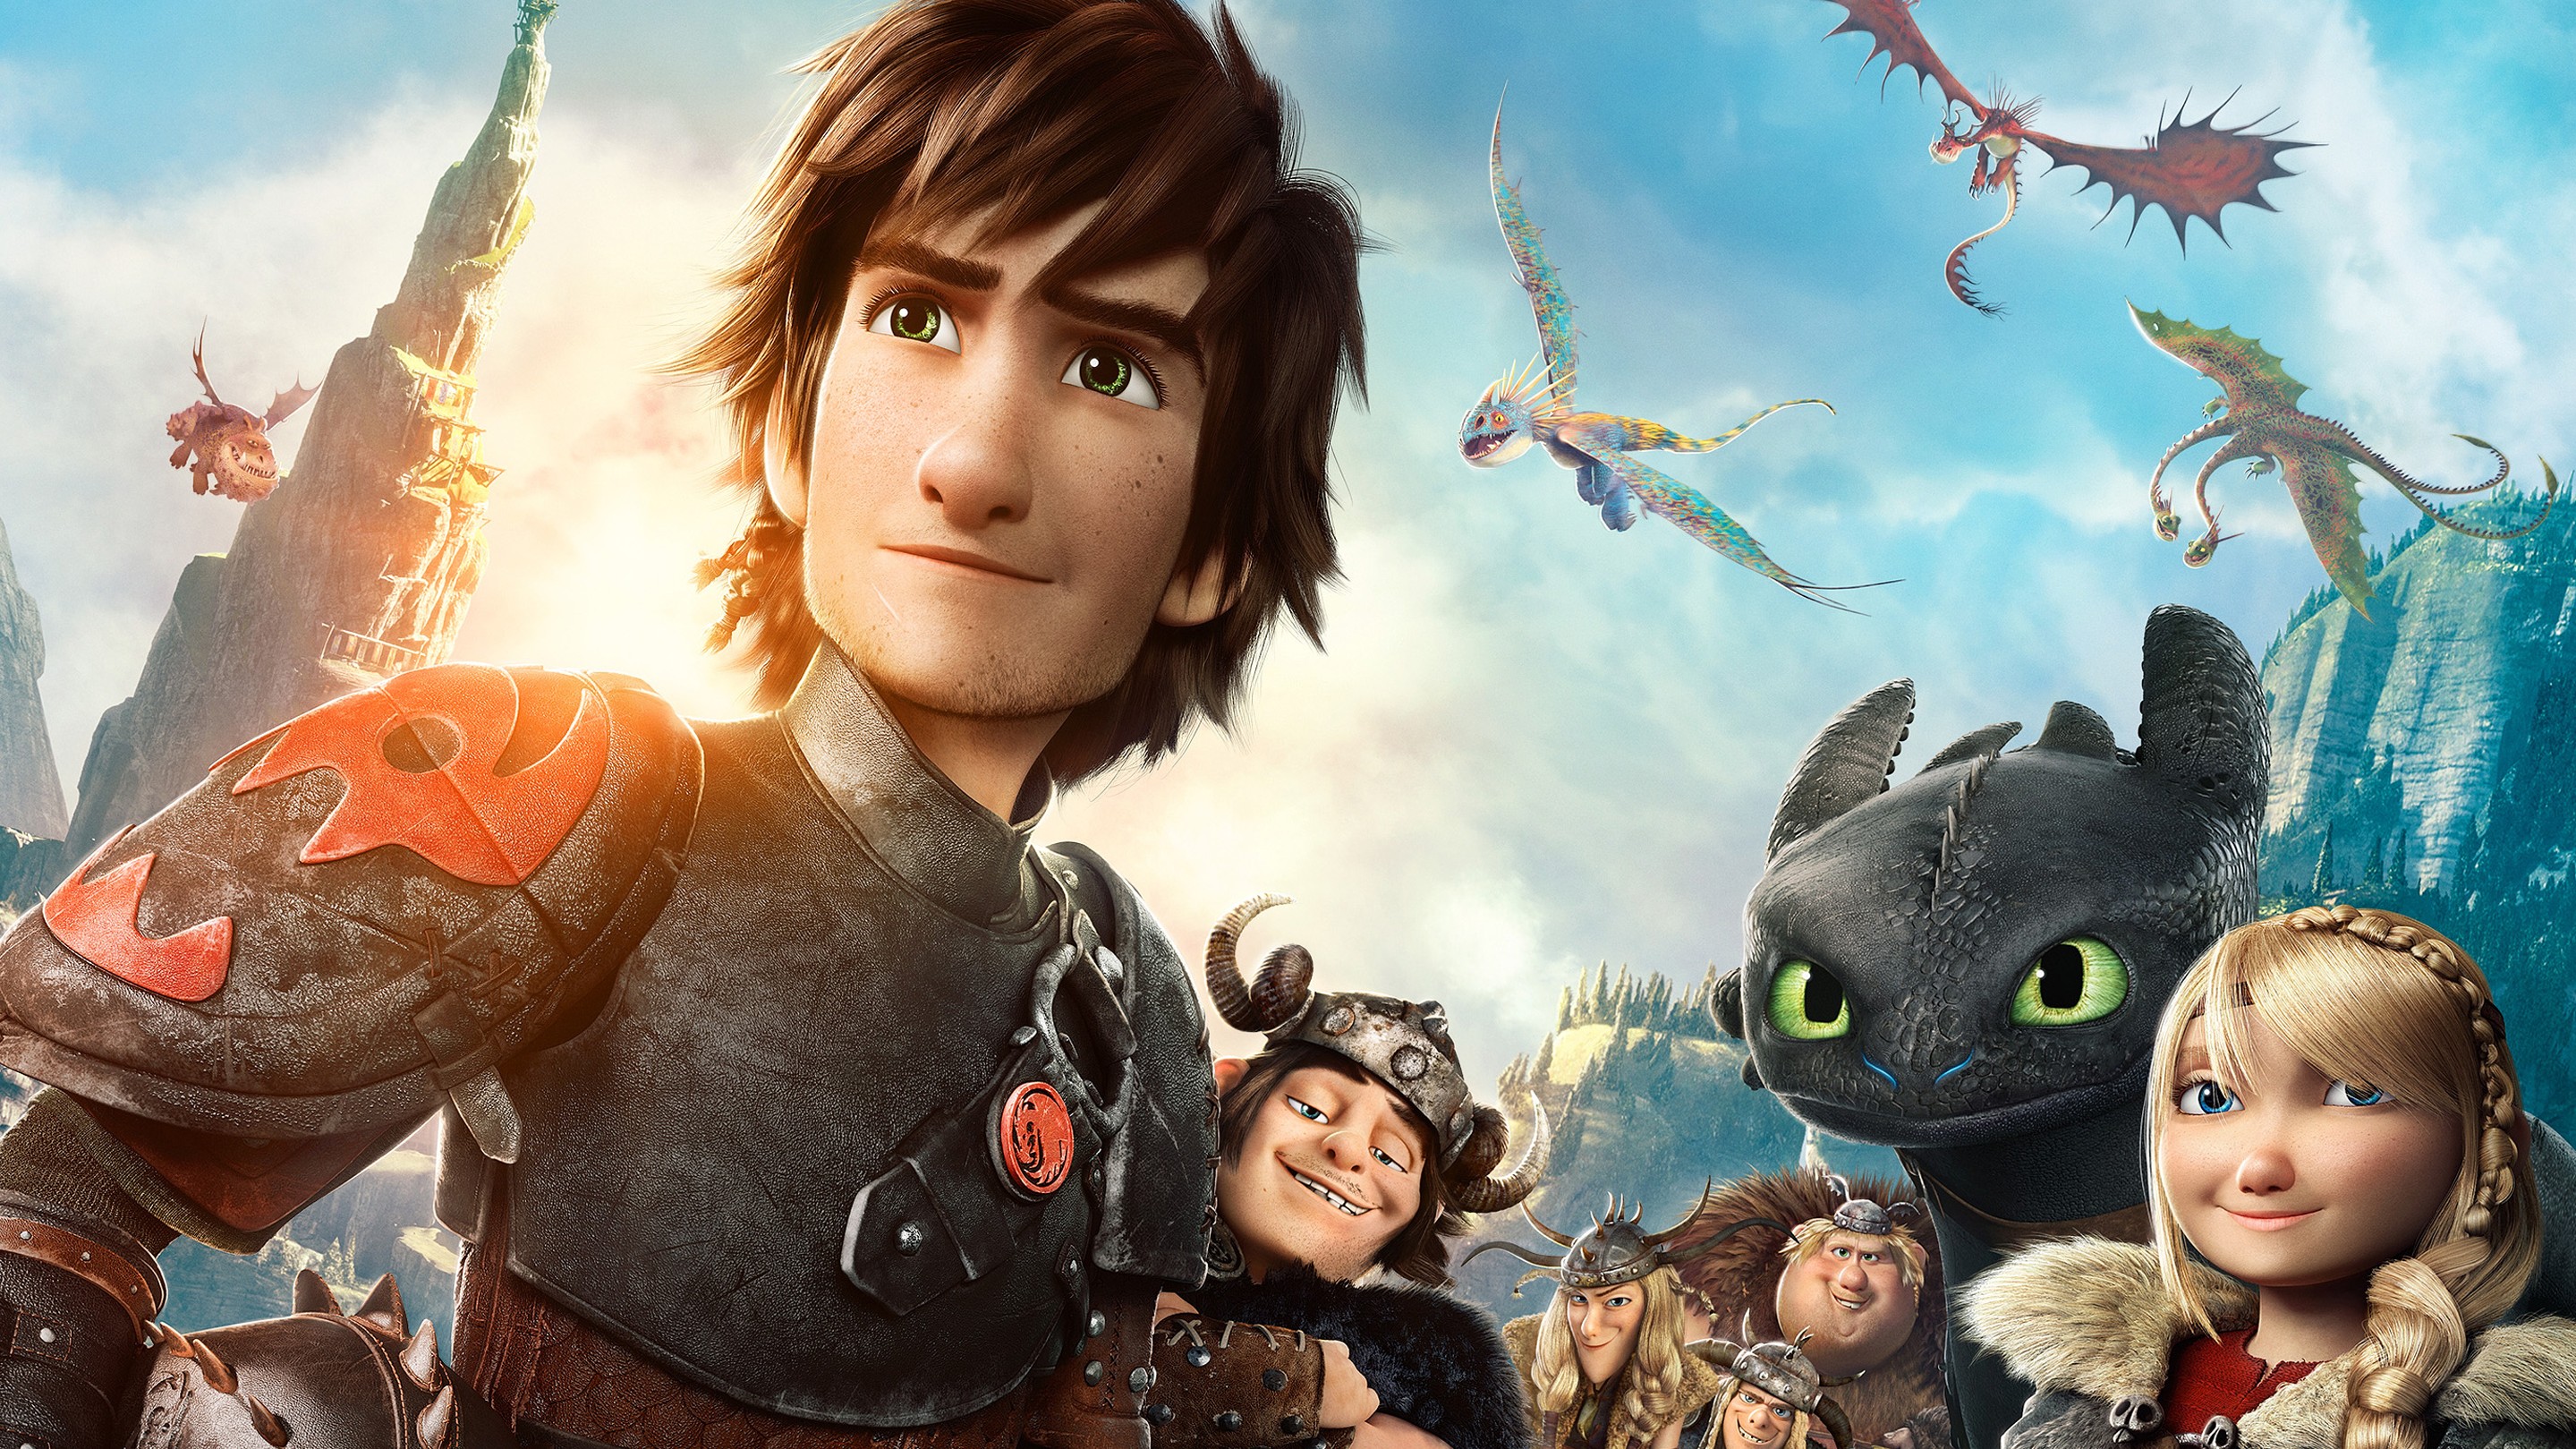 Amazing How To Train Your Dragon 2 Pictures & Backgrounds